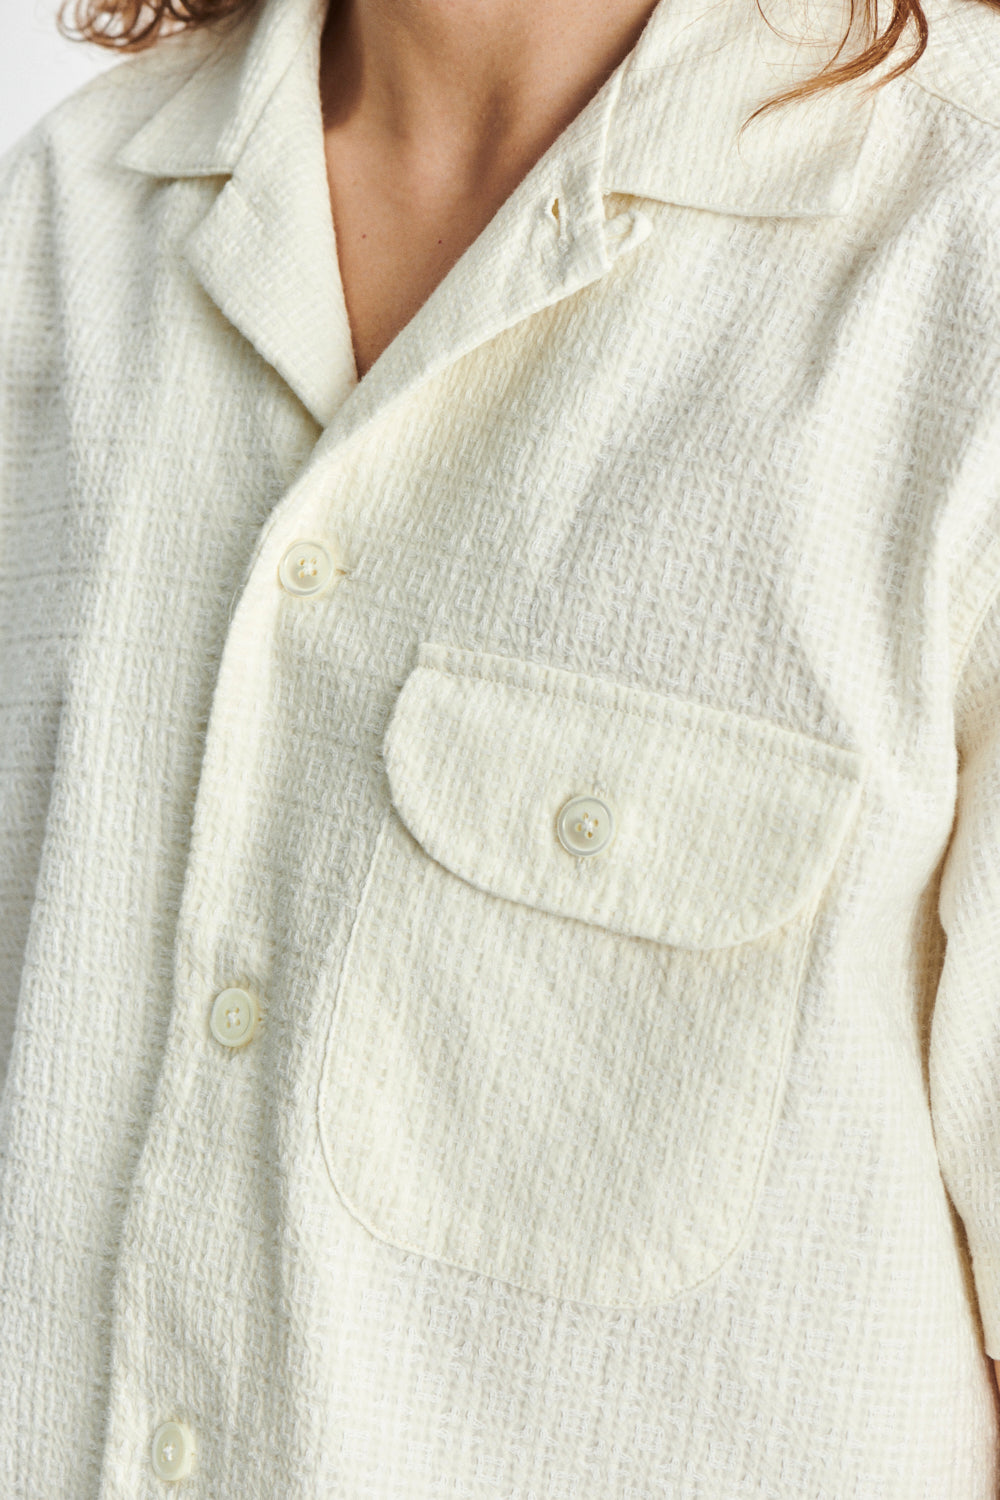 Short Sleeve Camp Collar Shirt in an  Off-white Portuguese Jacquard Cotton